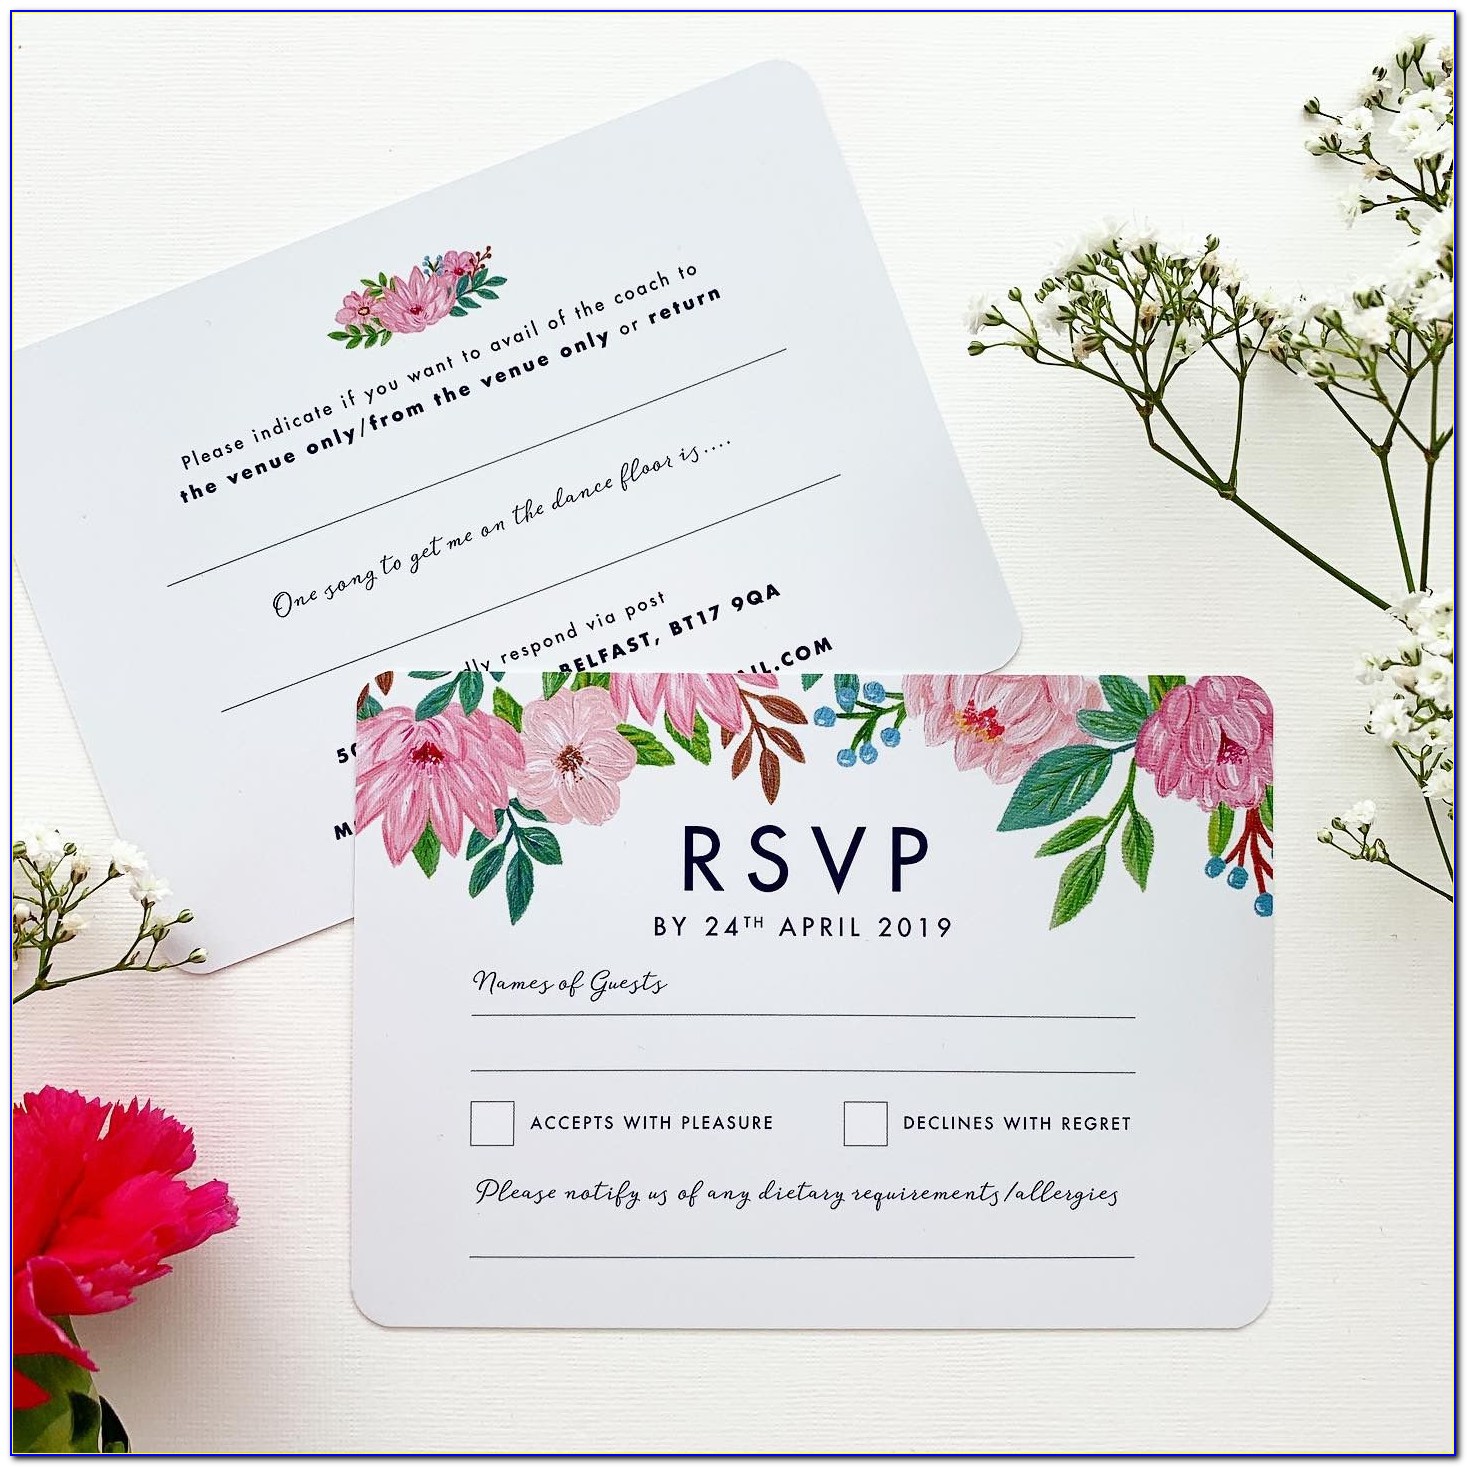 Email Wedding Invitations With Rsvp